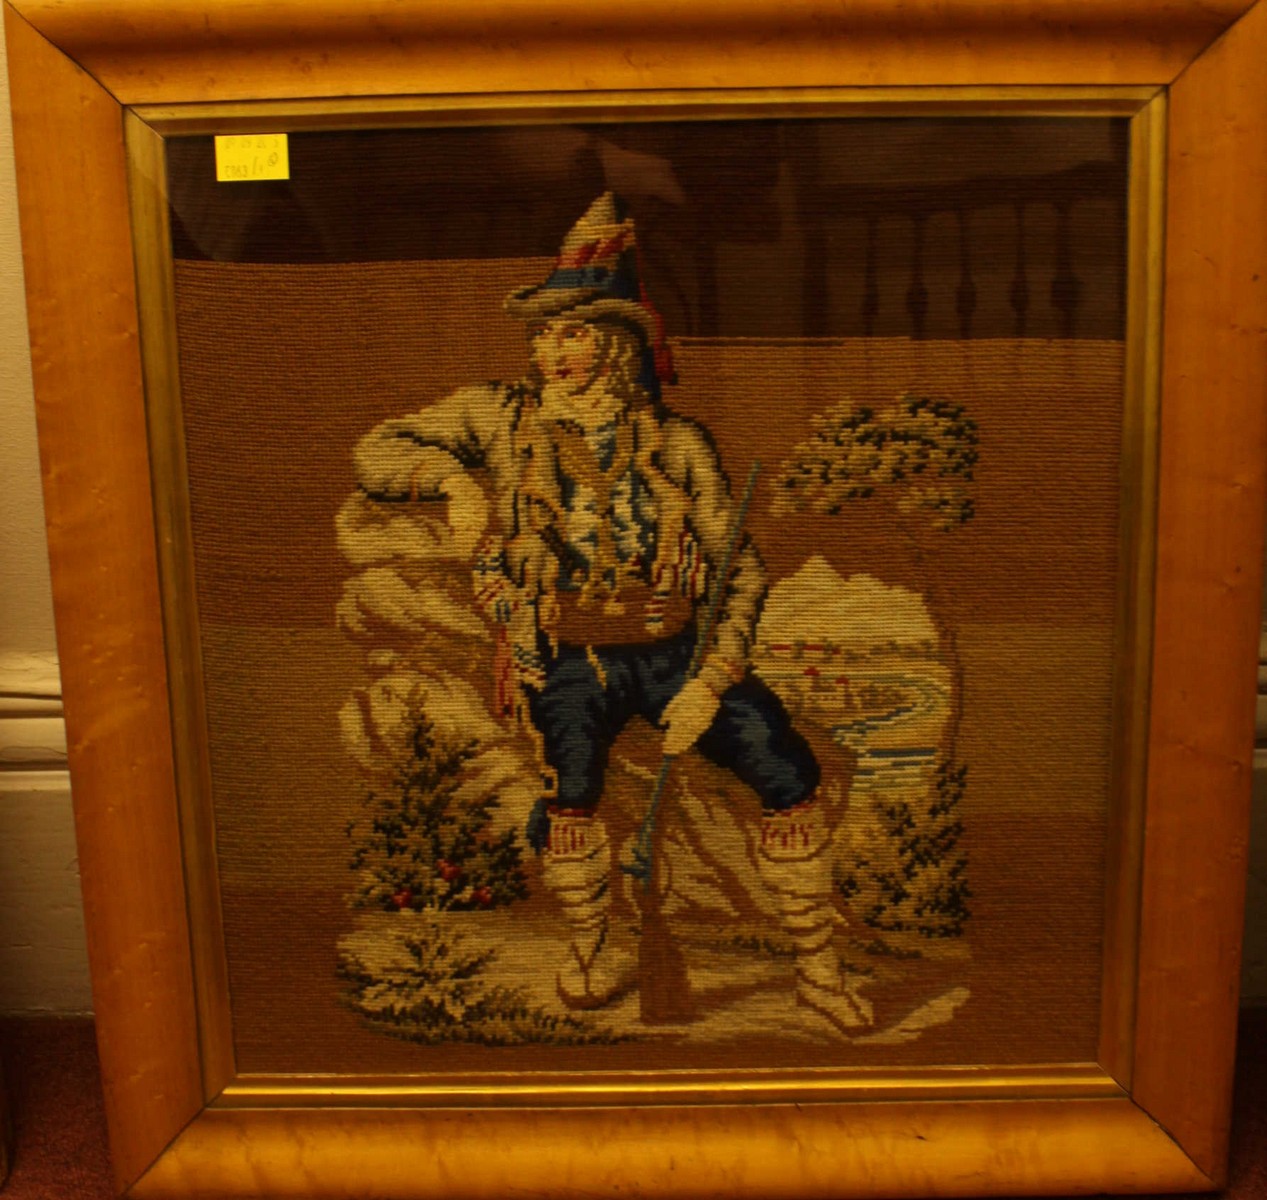 Two 19th century woolwork embroidered pictures of a huntsman, one with dogs, in birds eye maple